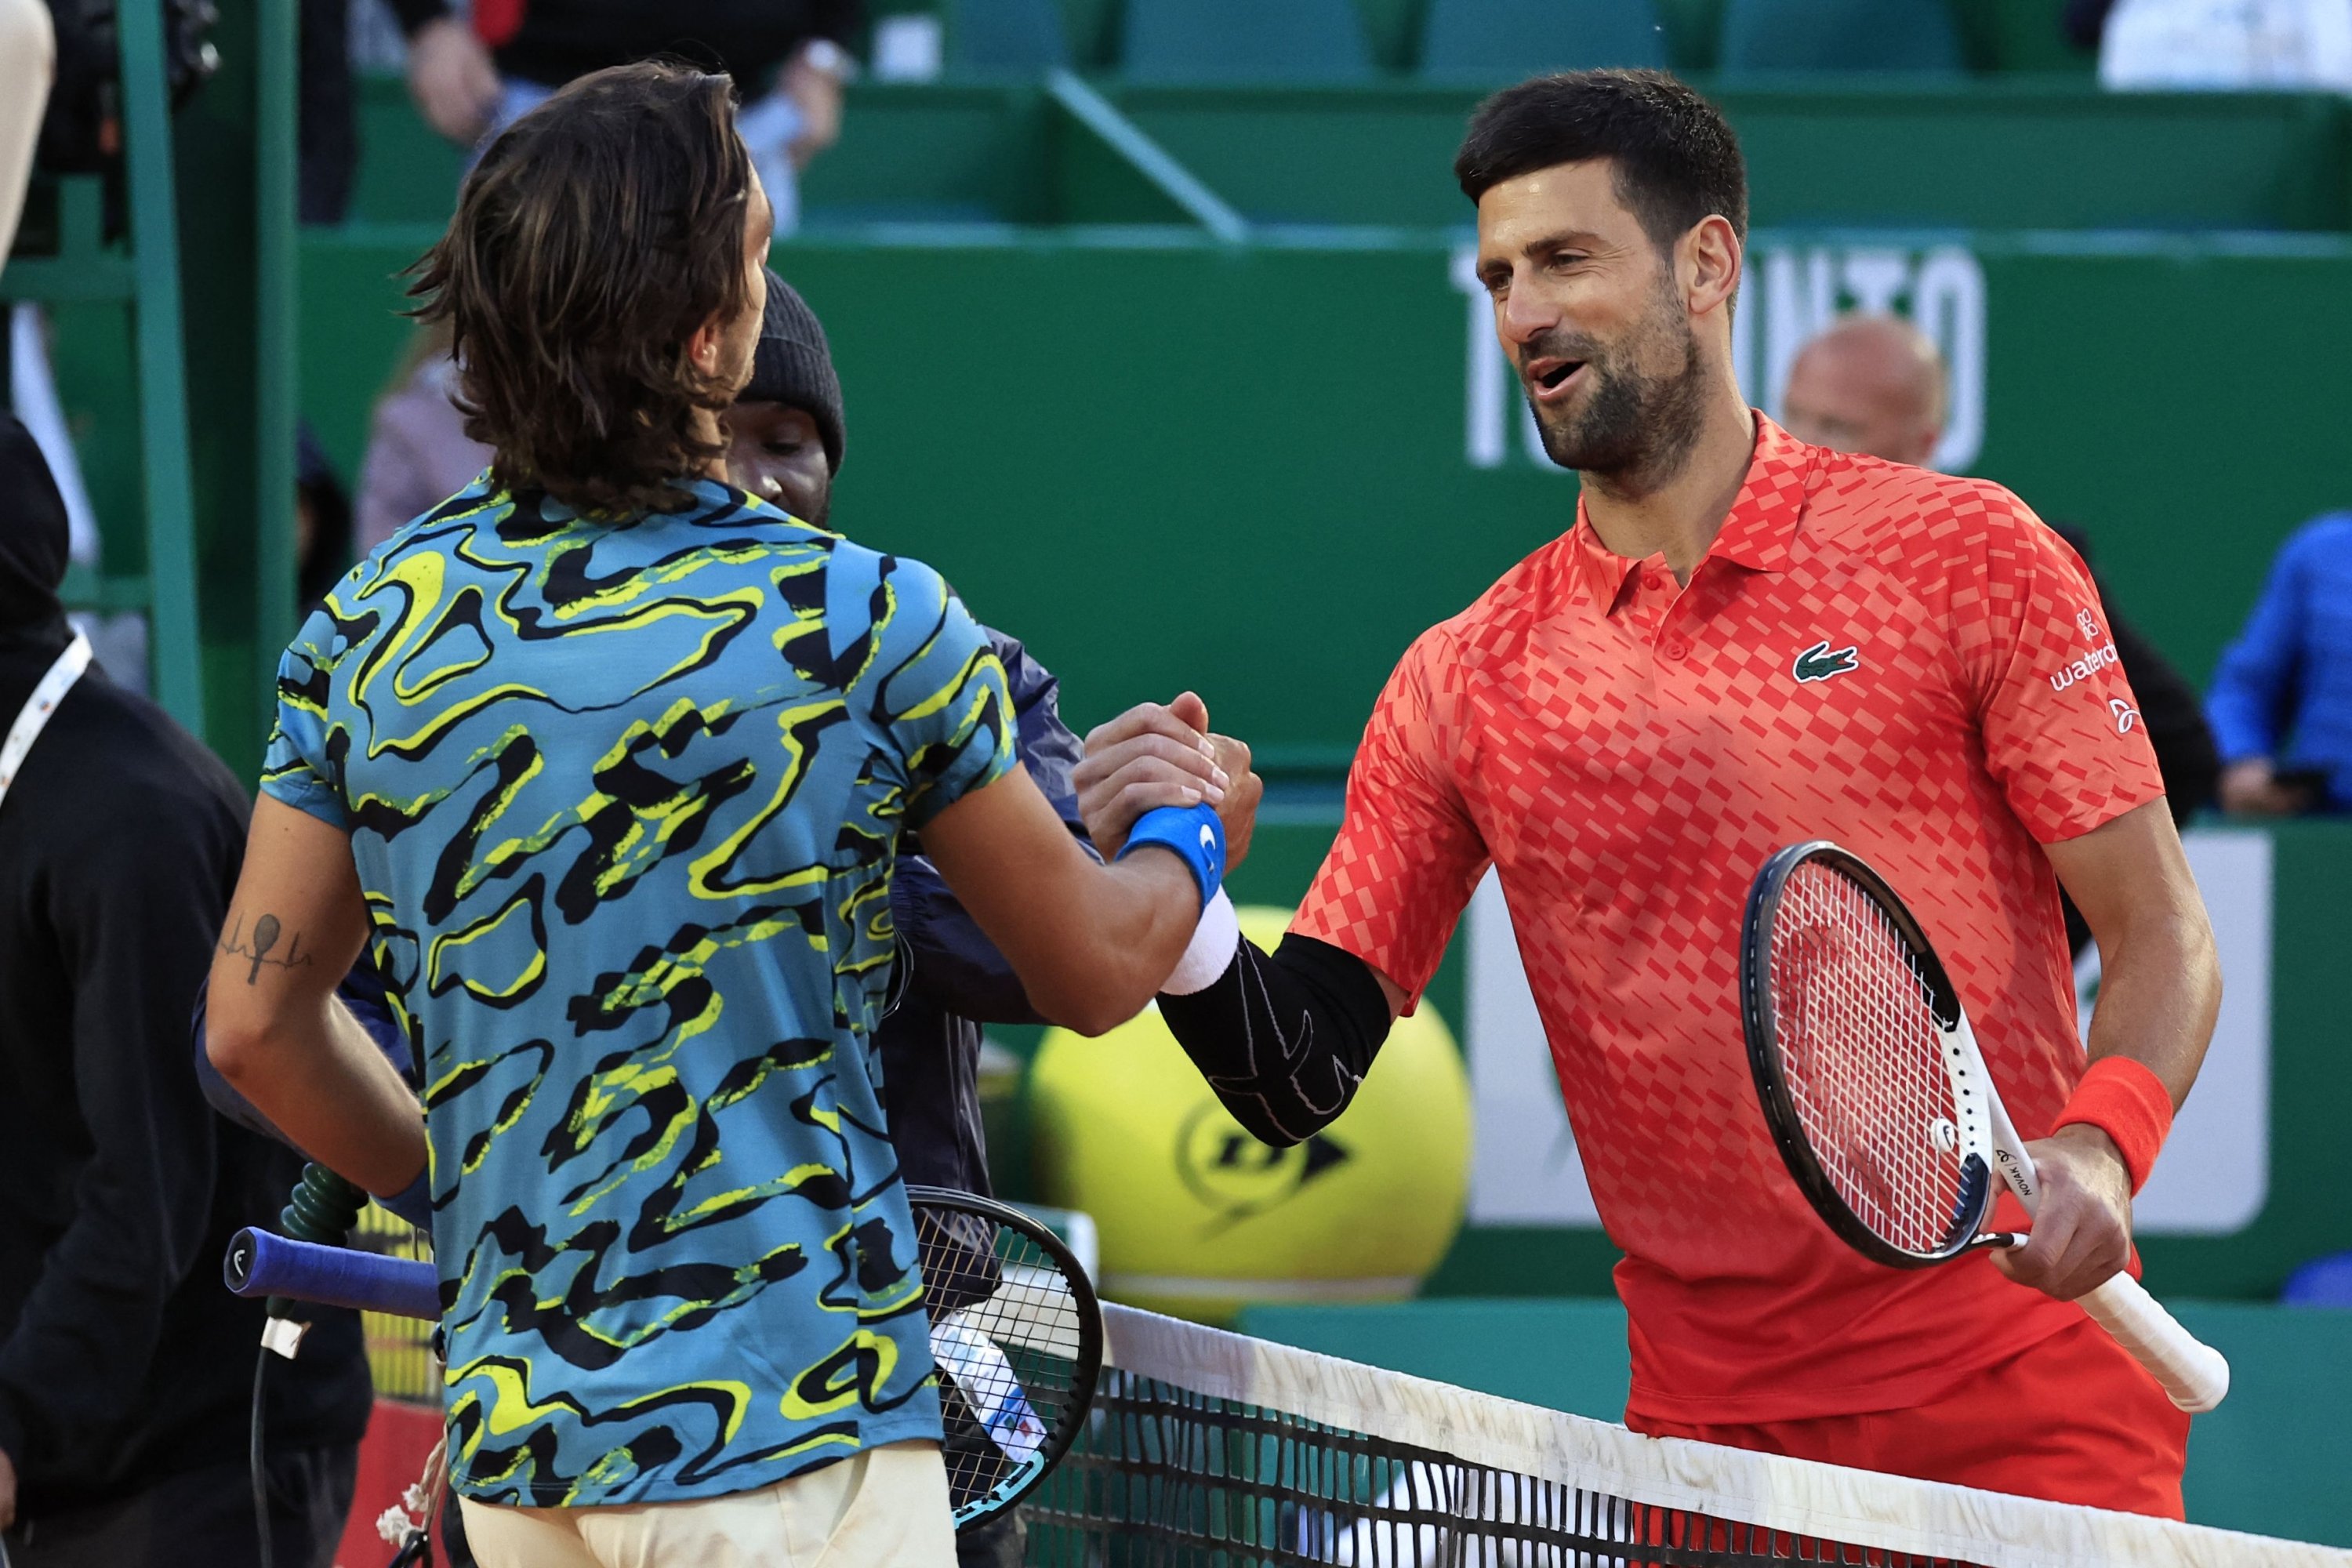 Novak Djokovic sent to another early exit at Monte Carlo Daily Sabah